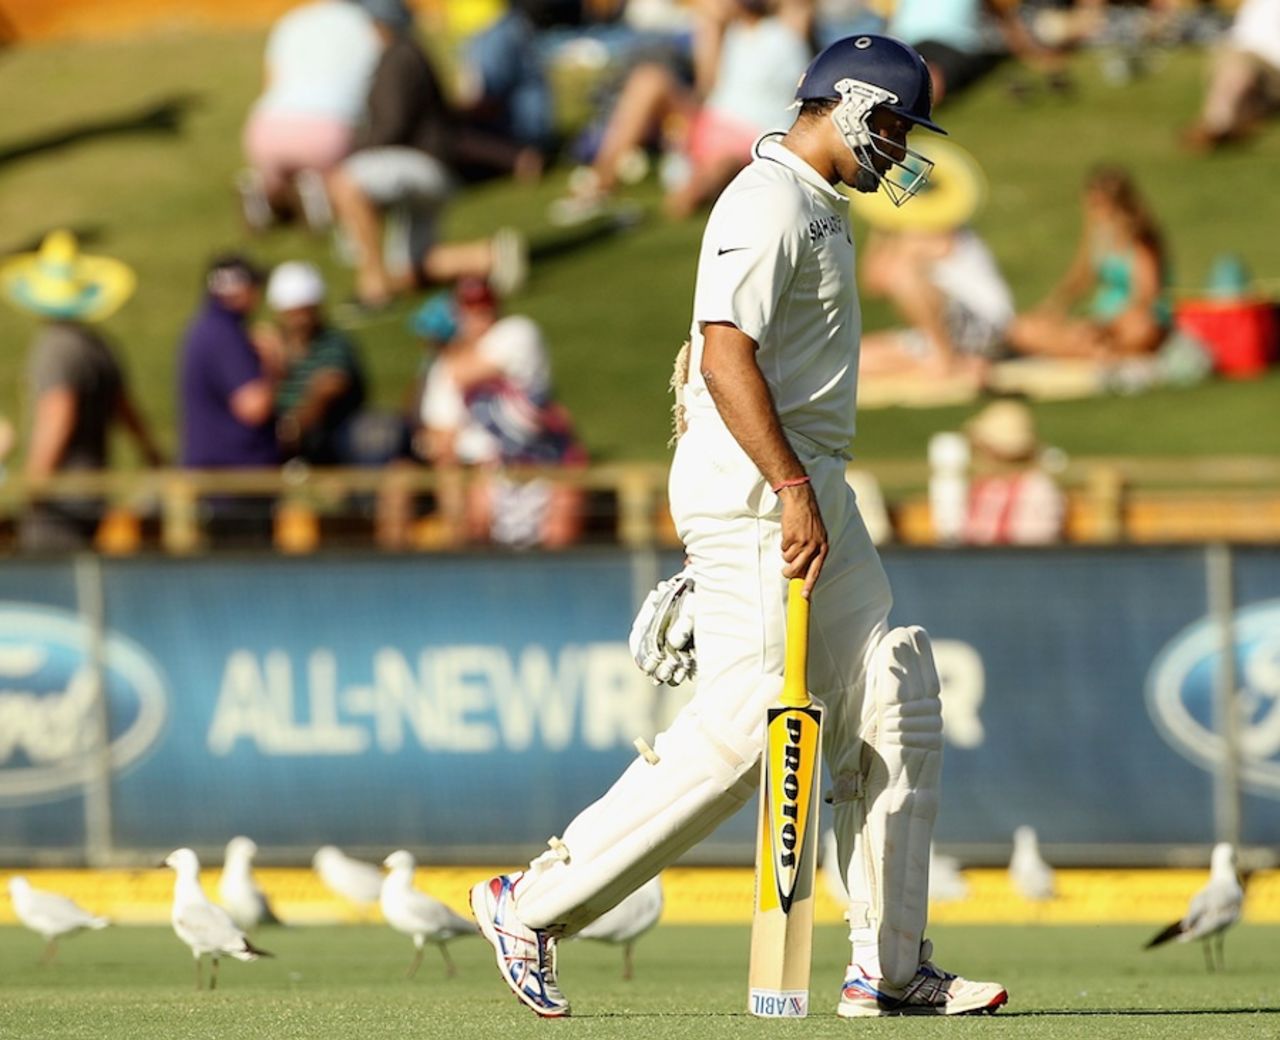 VVS Laxman trudges off the WACA after making a duck, Australia v India, 3rd Test, Perth, 2nd day, January 14, 2012